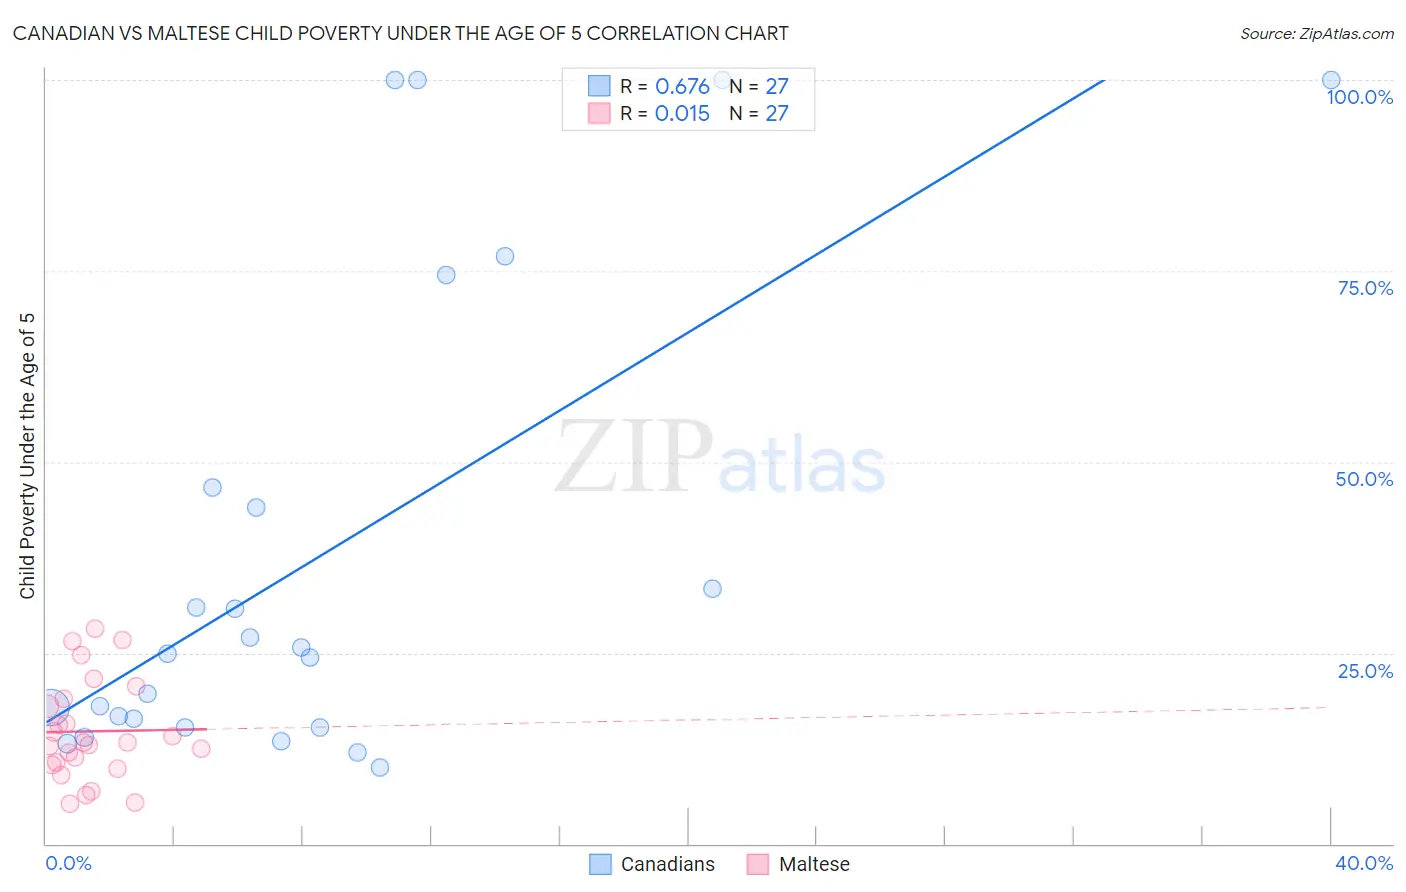 Canadian vs Maltese Child Poverty Under the Age of 5